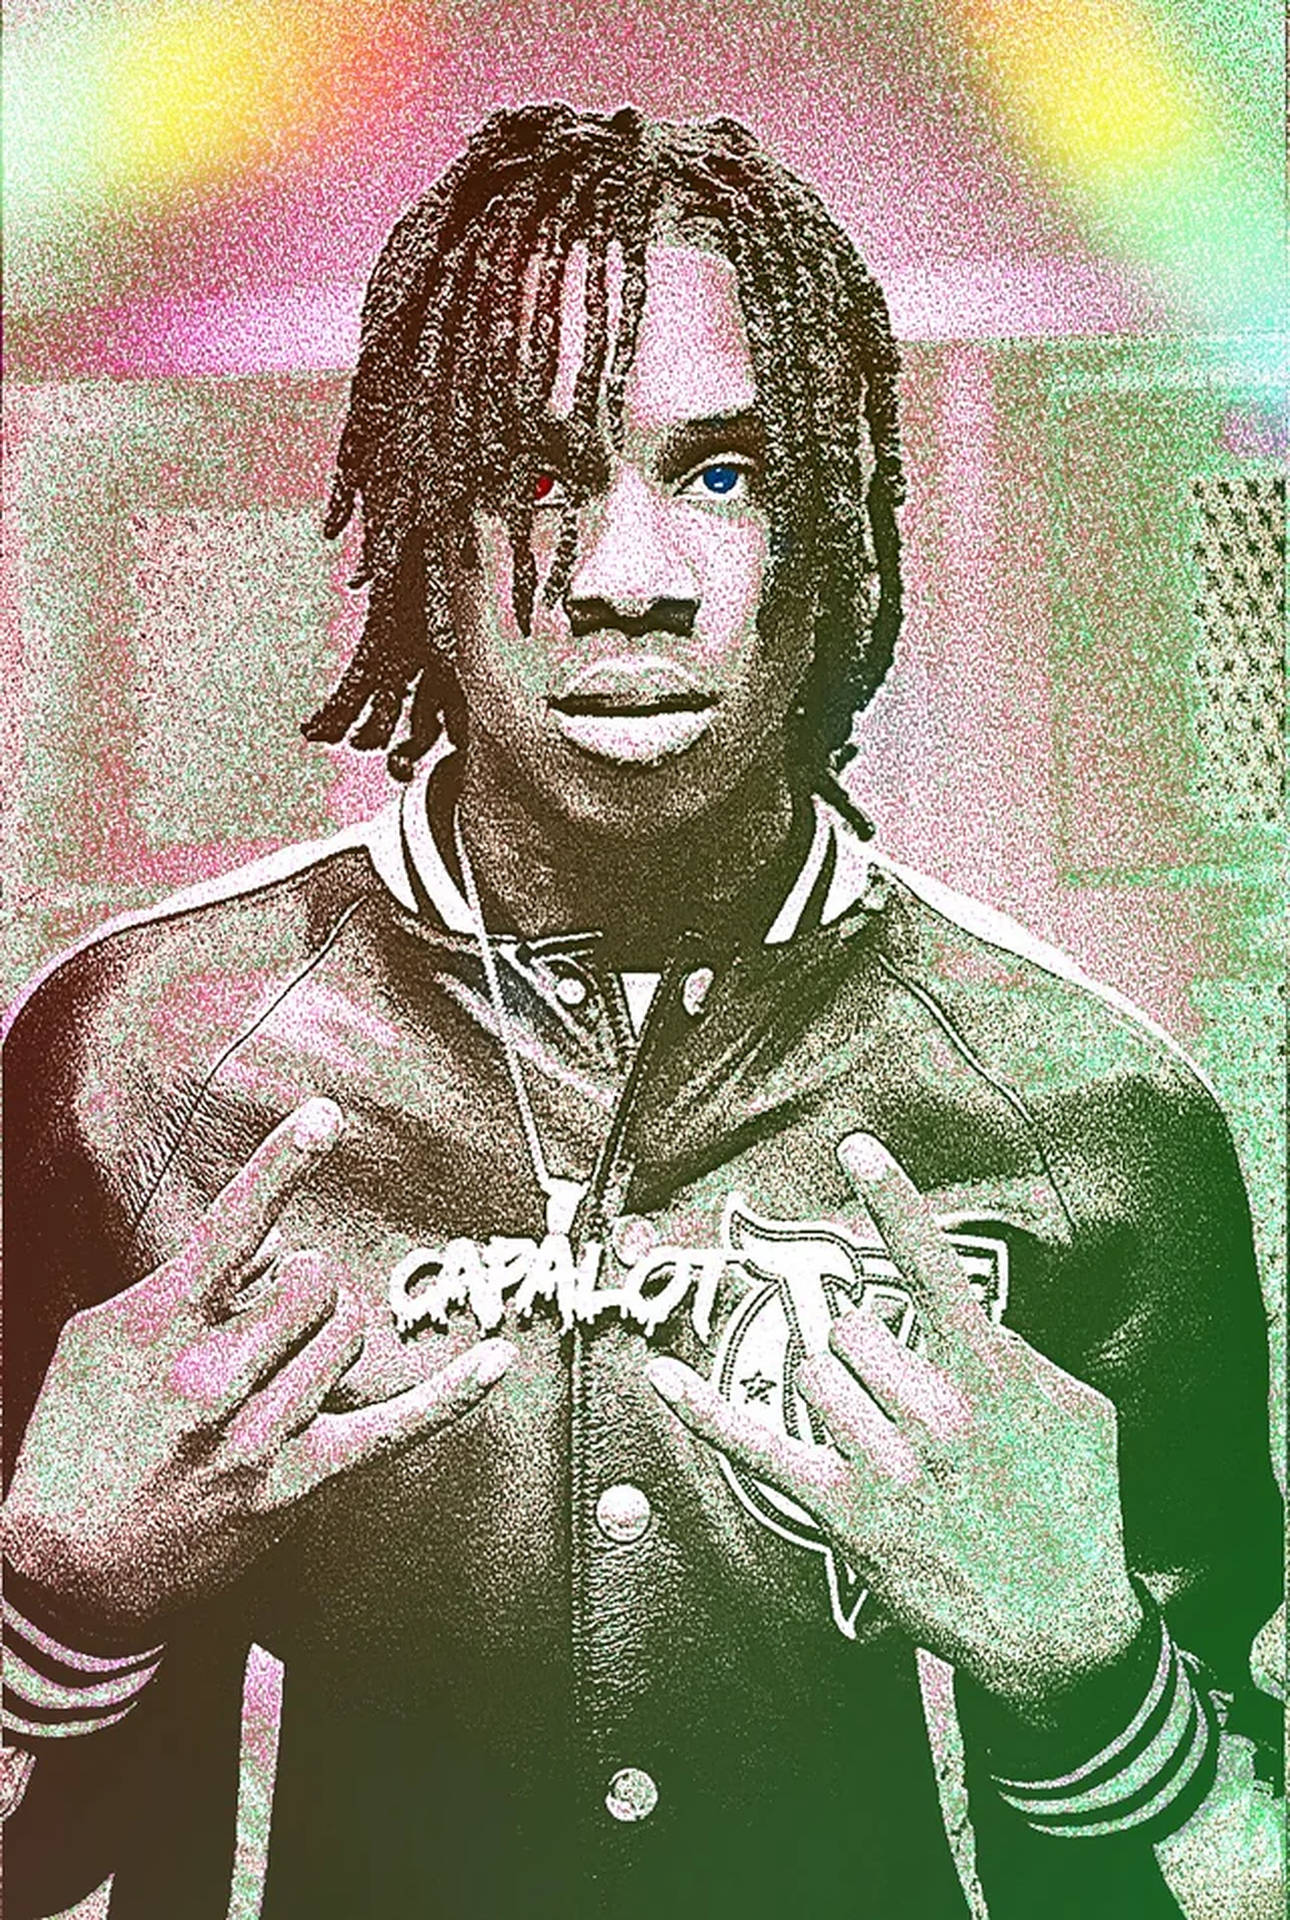 Polo G Psychedelic Art Background